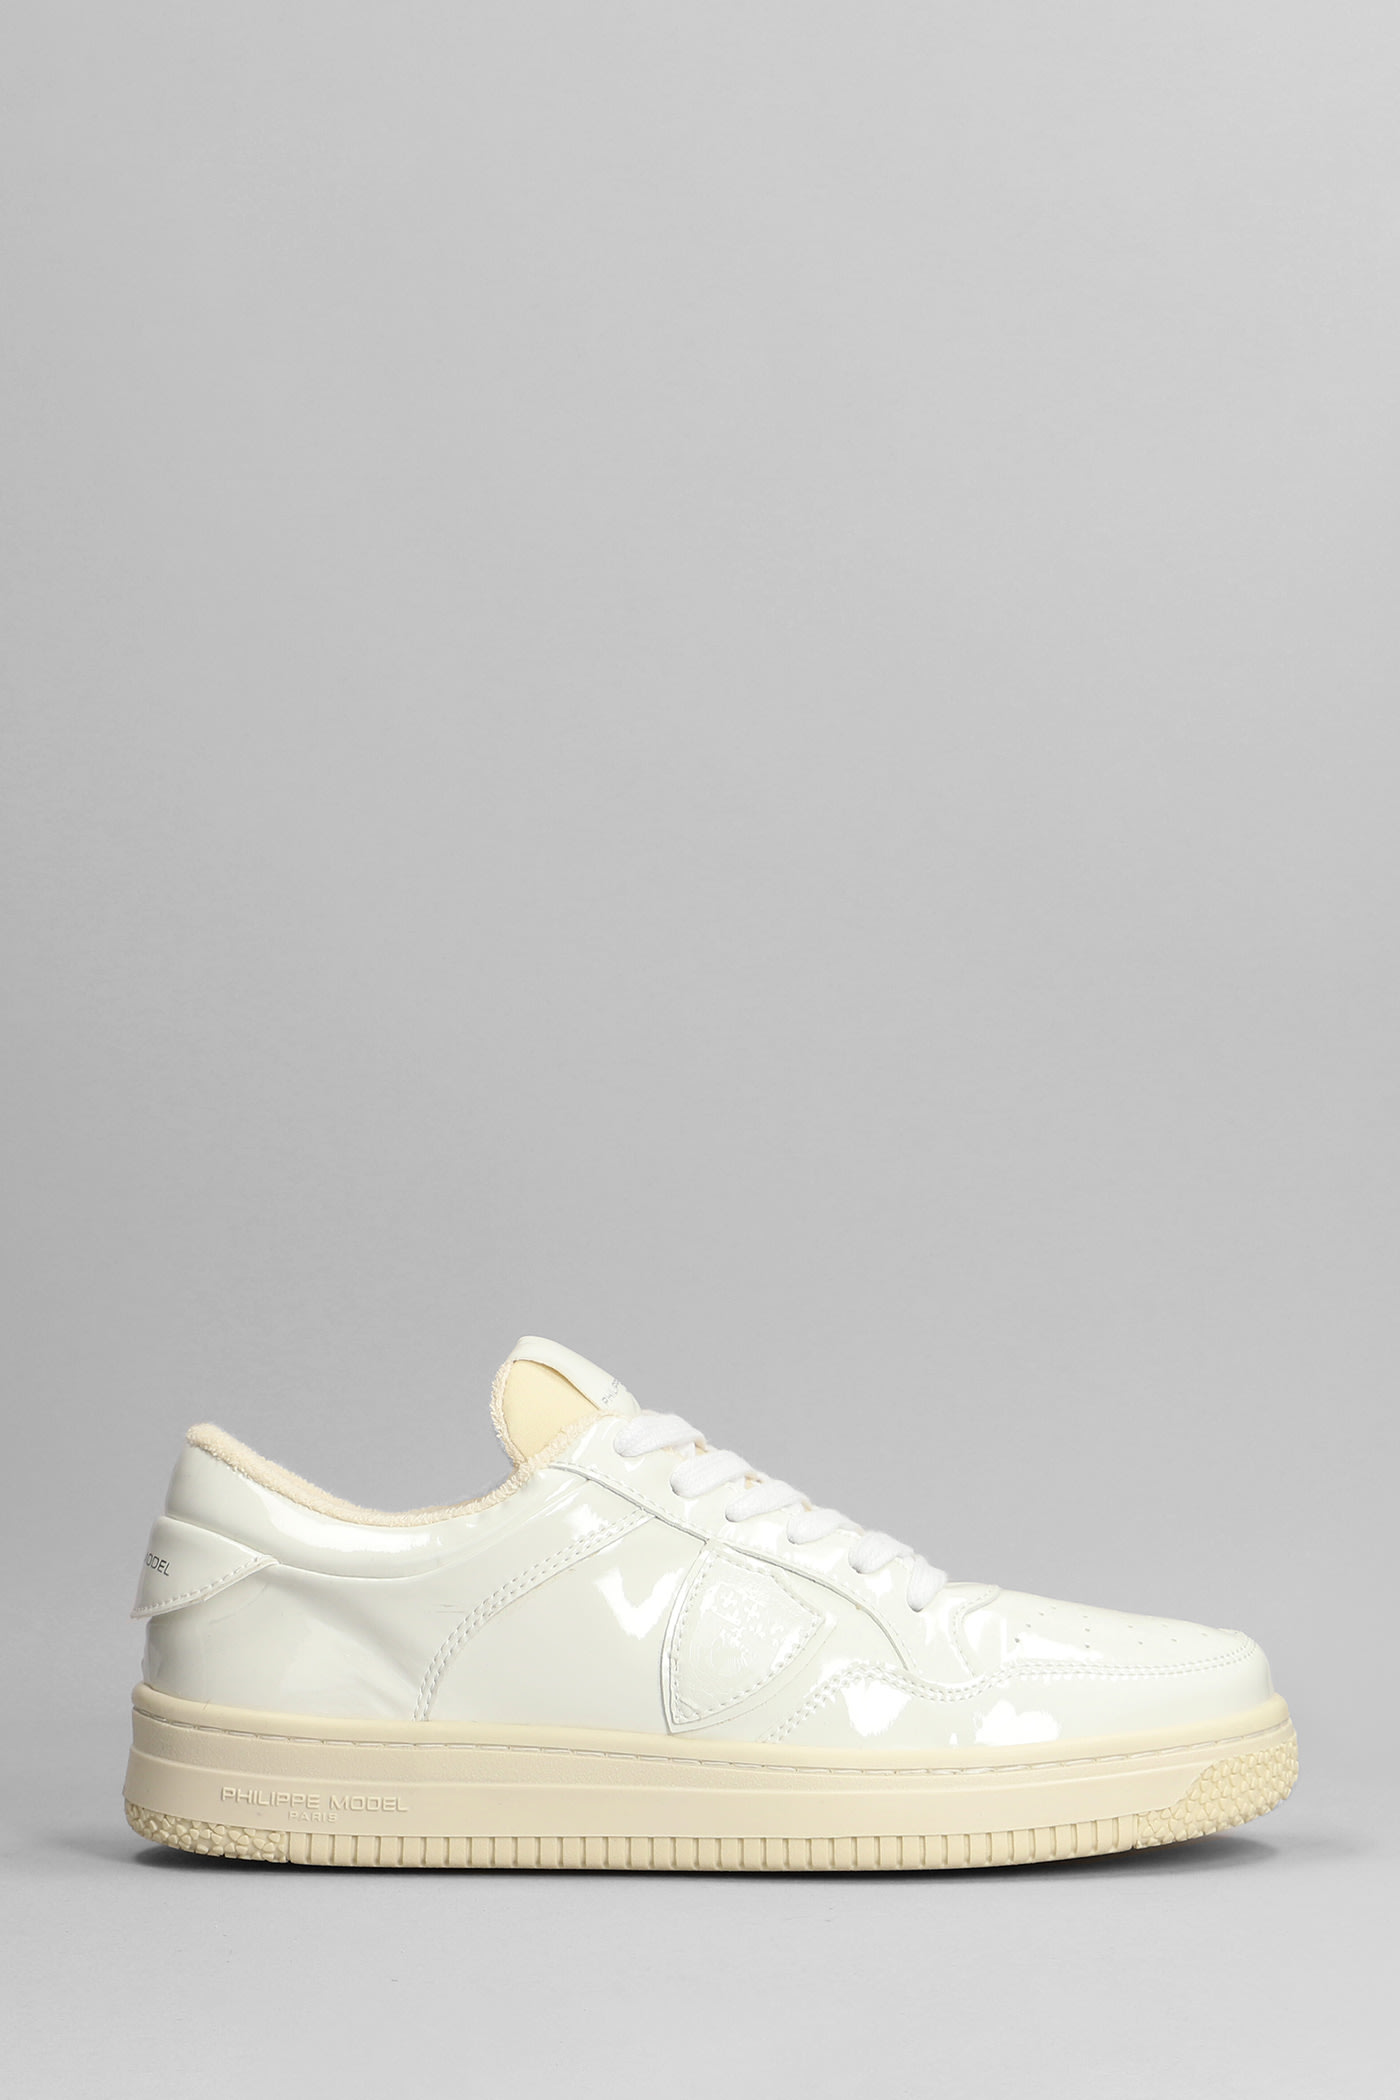 Philippe Model Lyon Sneakers In White Patent Leather